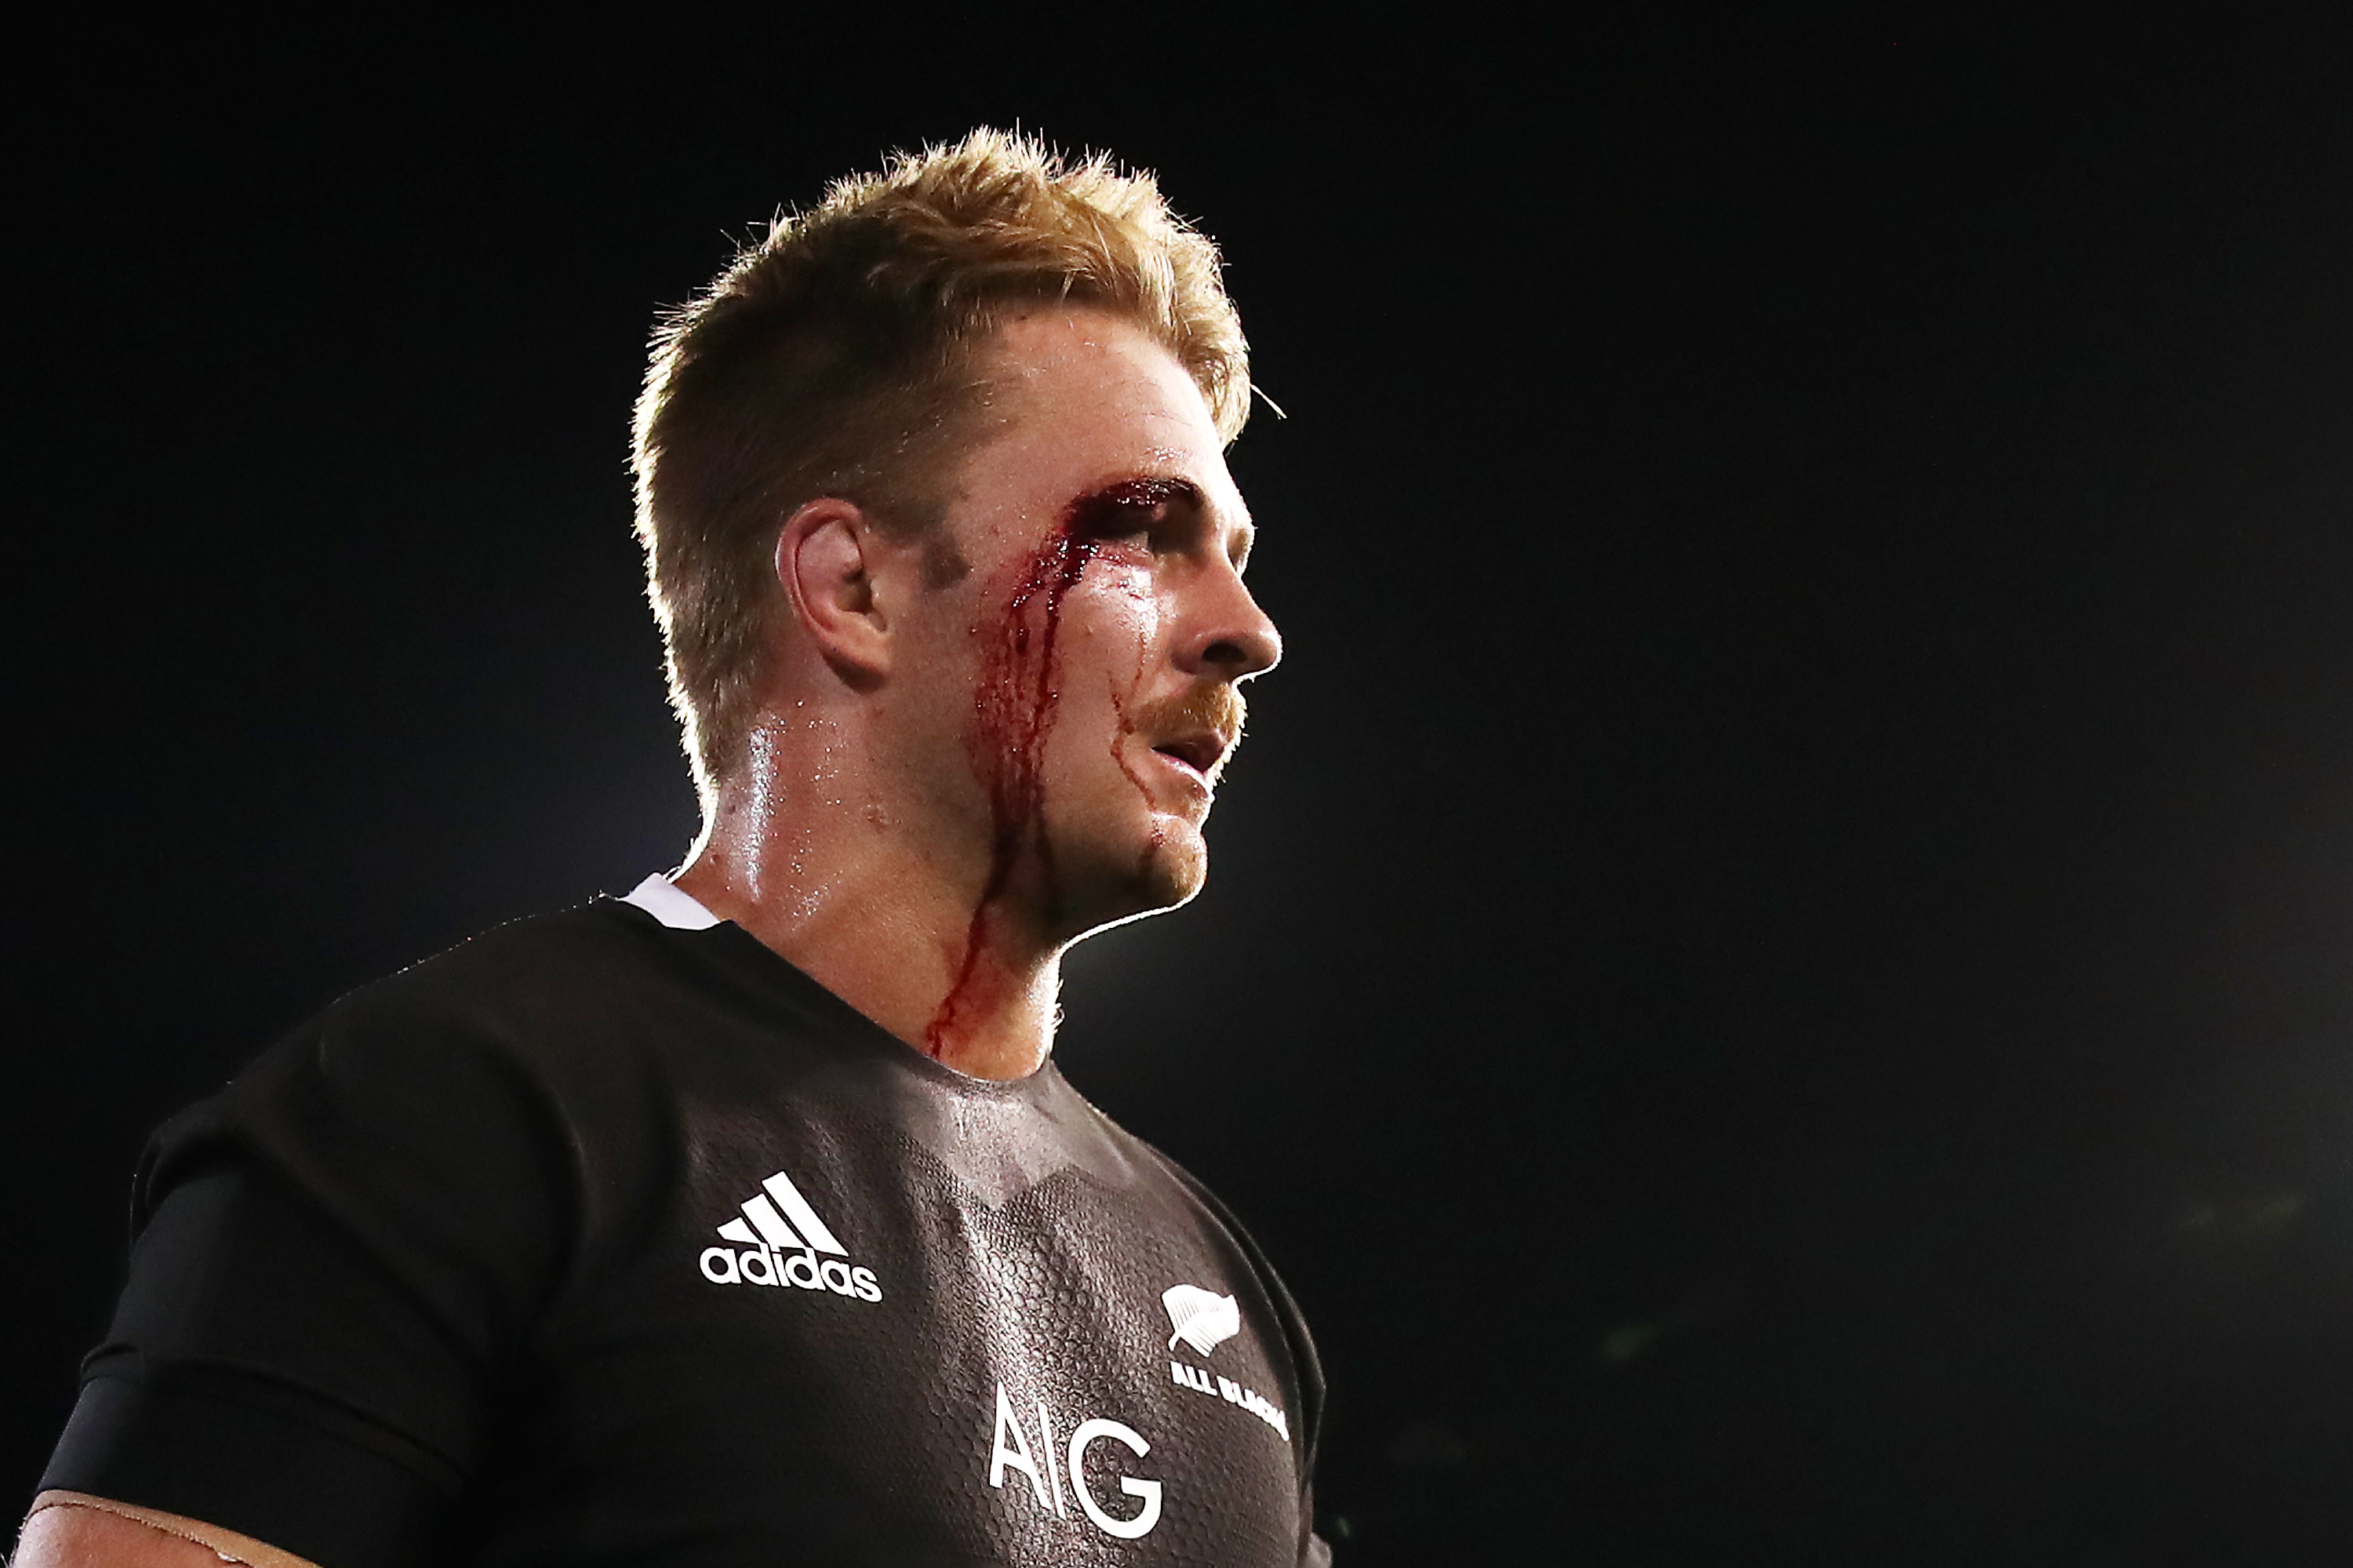 Sam Cane of the All Blacks walks off the field after winning.